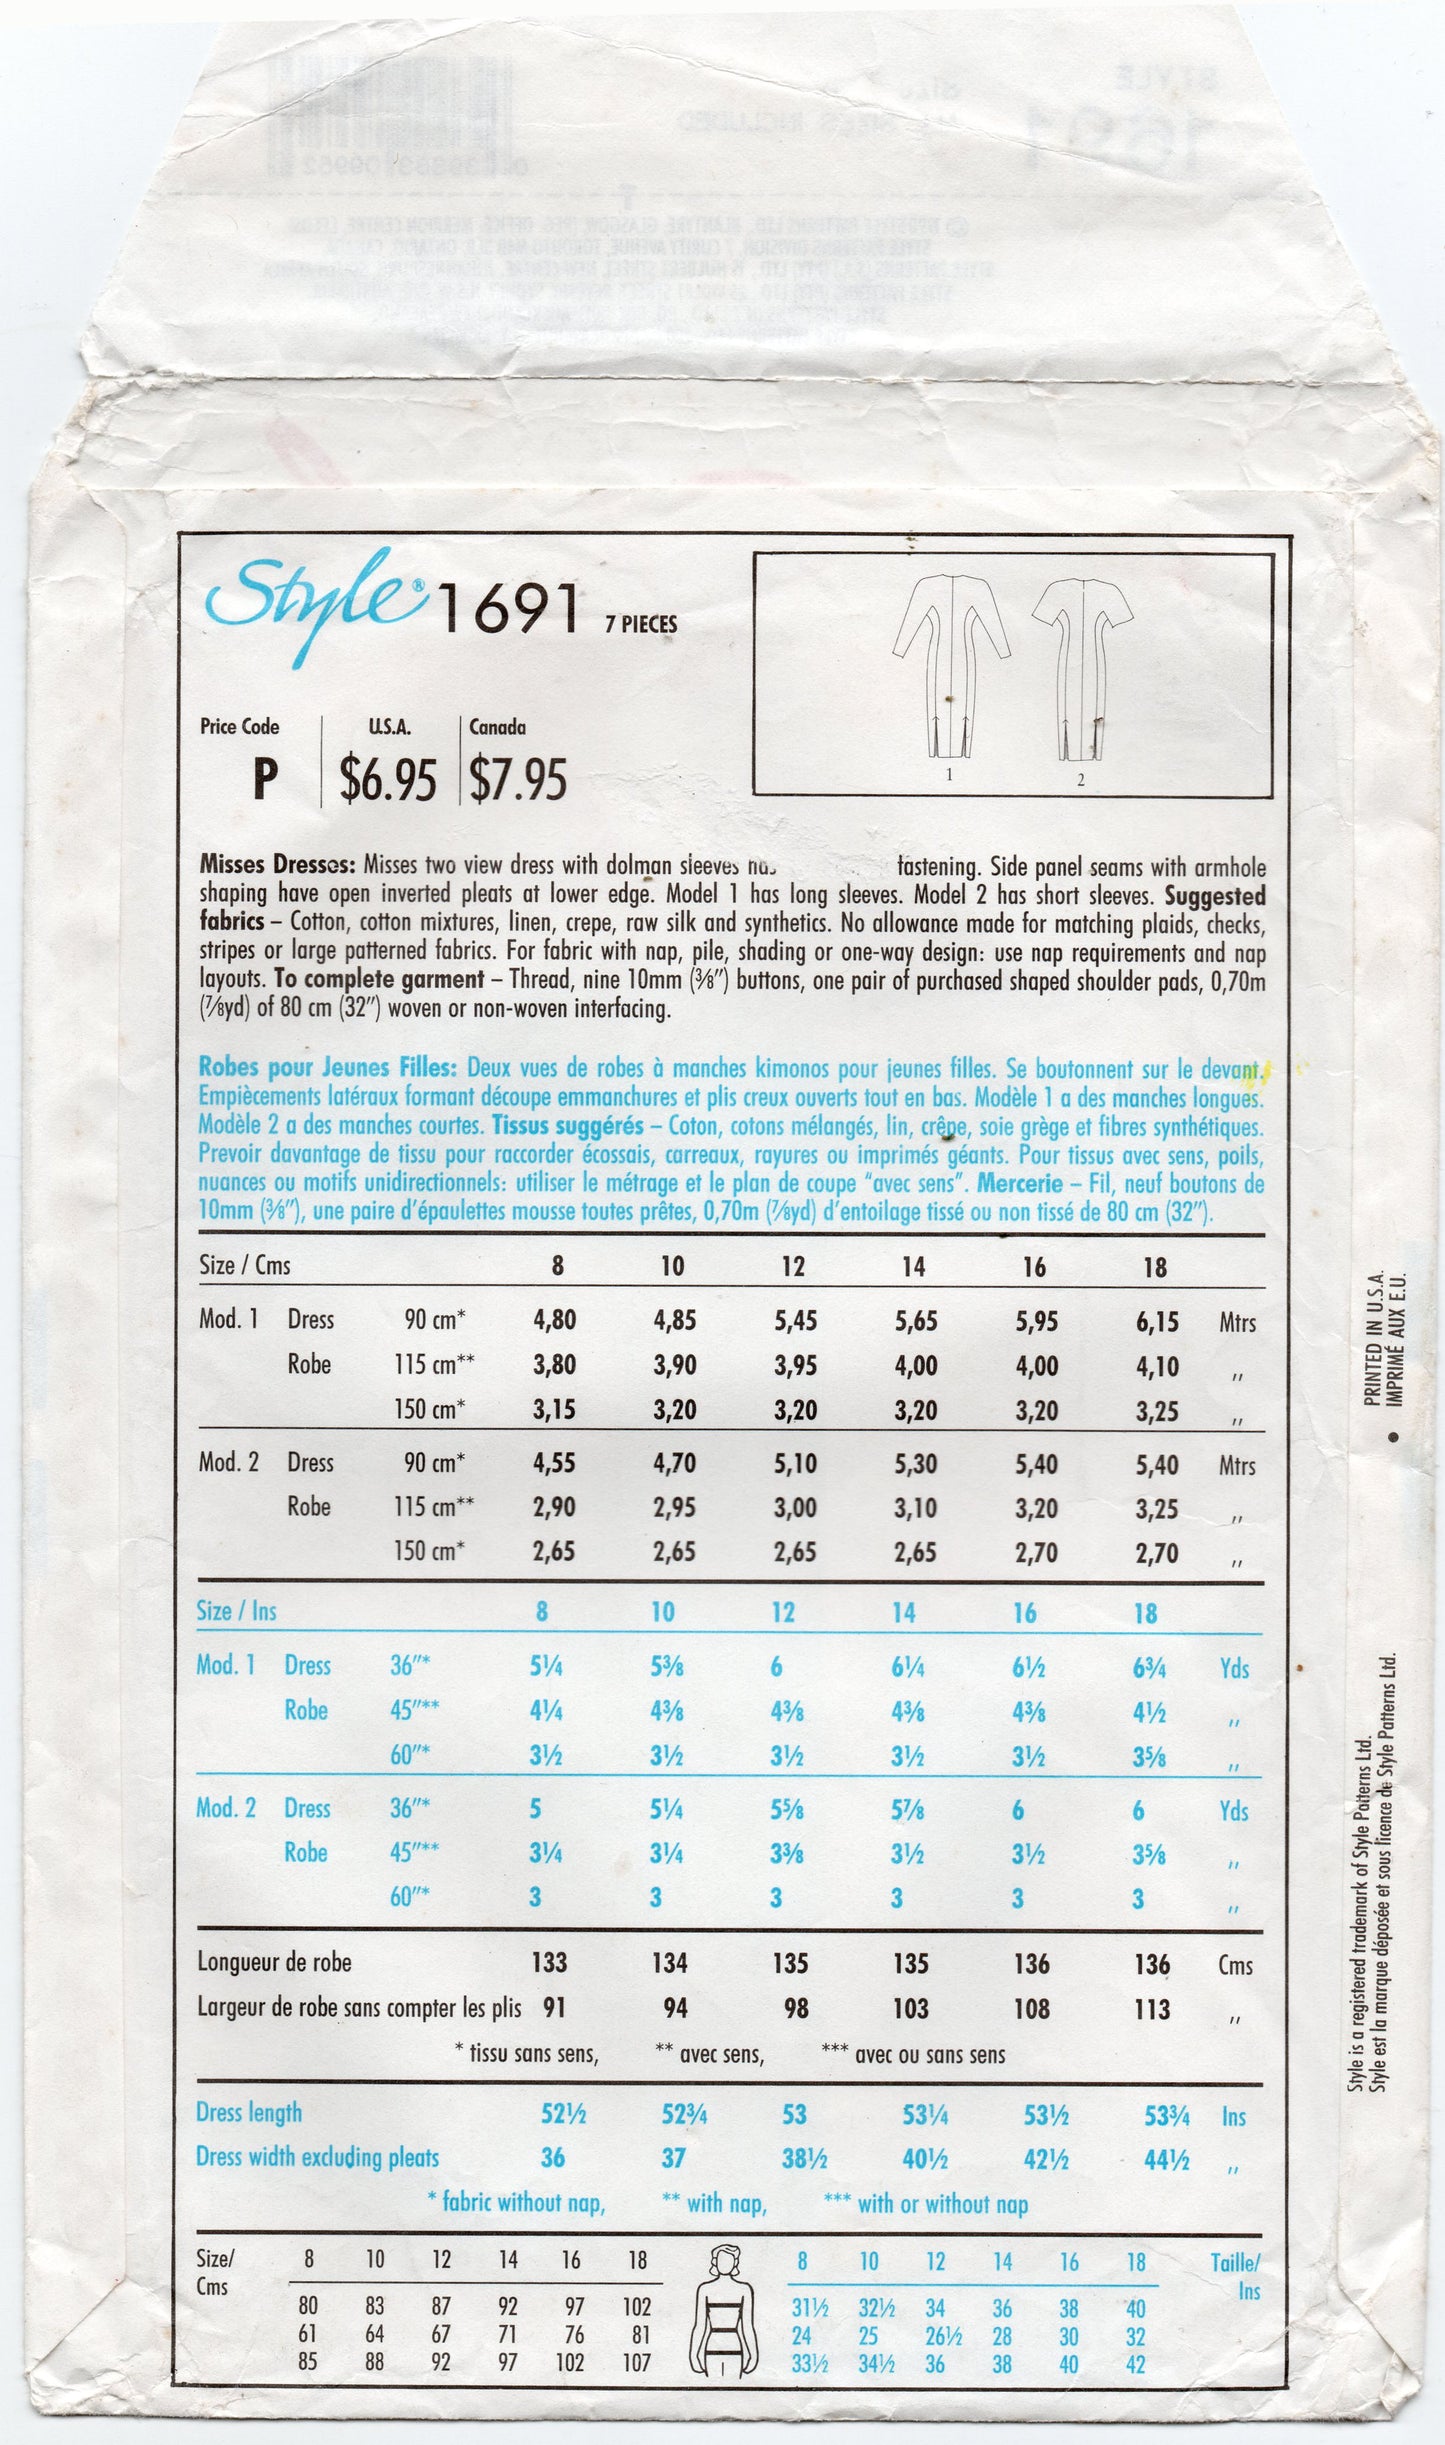 Style 1691 Womens Panelled Dress with Wedge Neckline 1990s Vintage Sewing Pattern Size 8 - 18 UNCUT Factory Folded